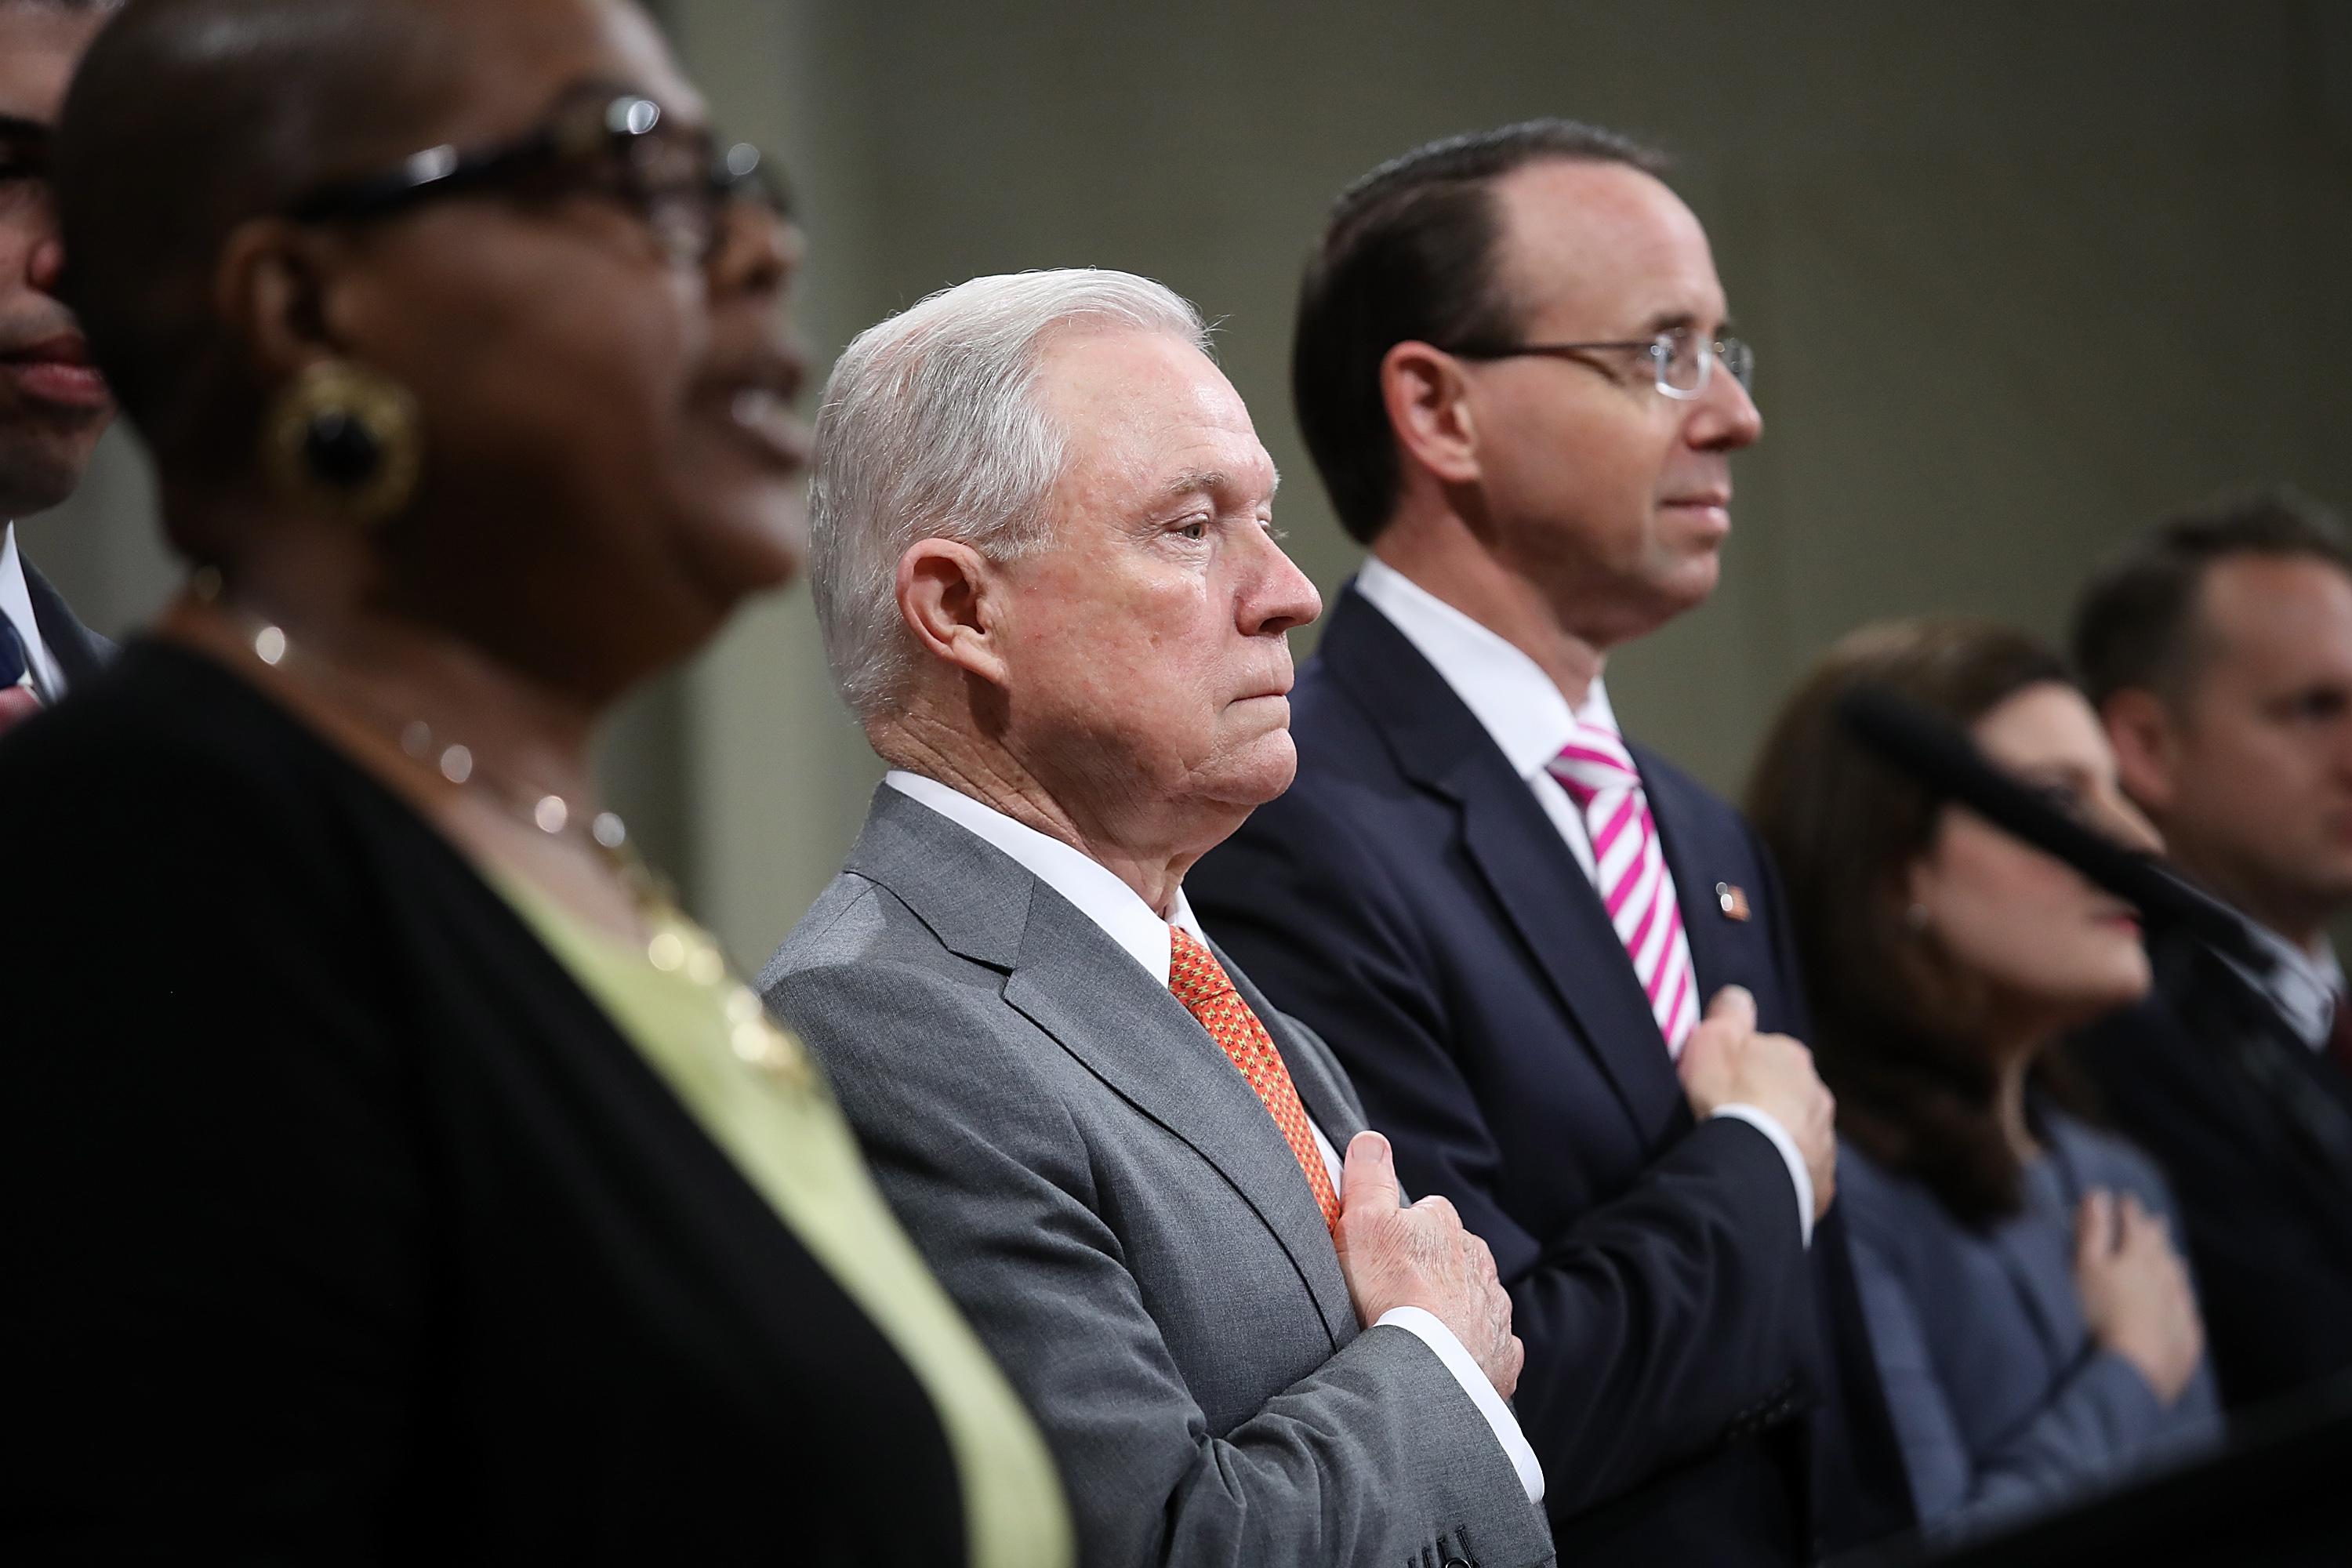 Jeff Sessions, standing to the left of Deputy Attorney General Rod Rosenstein, places his hand over his heart.